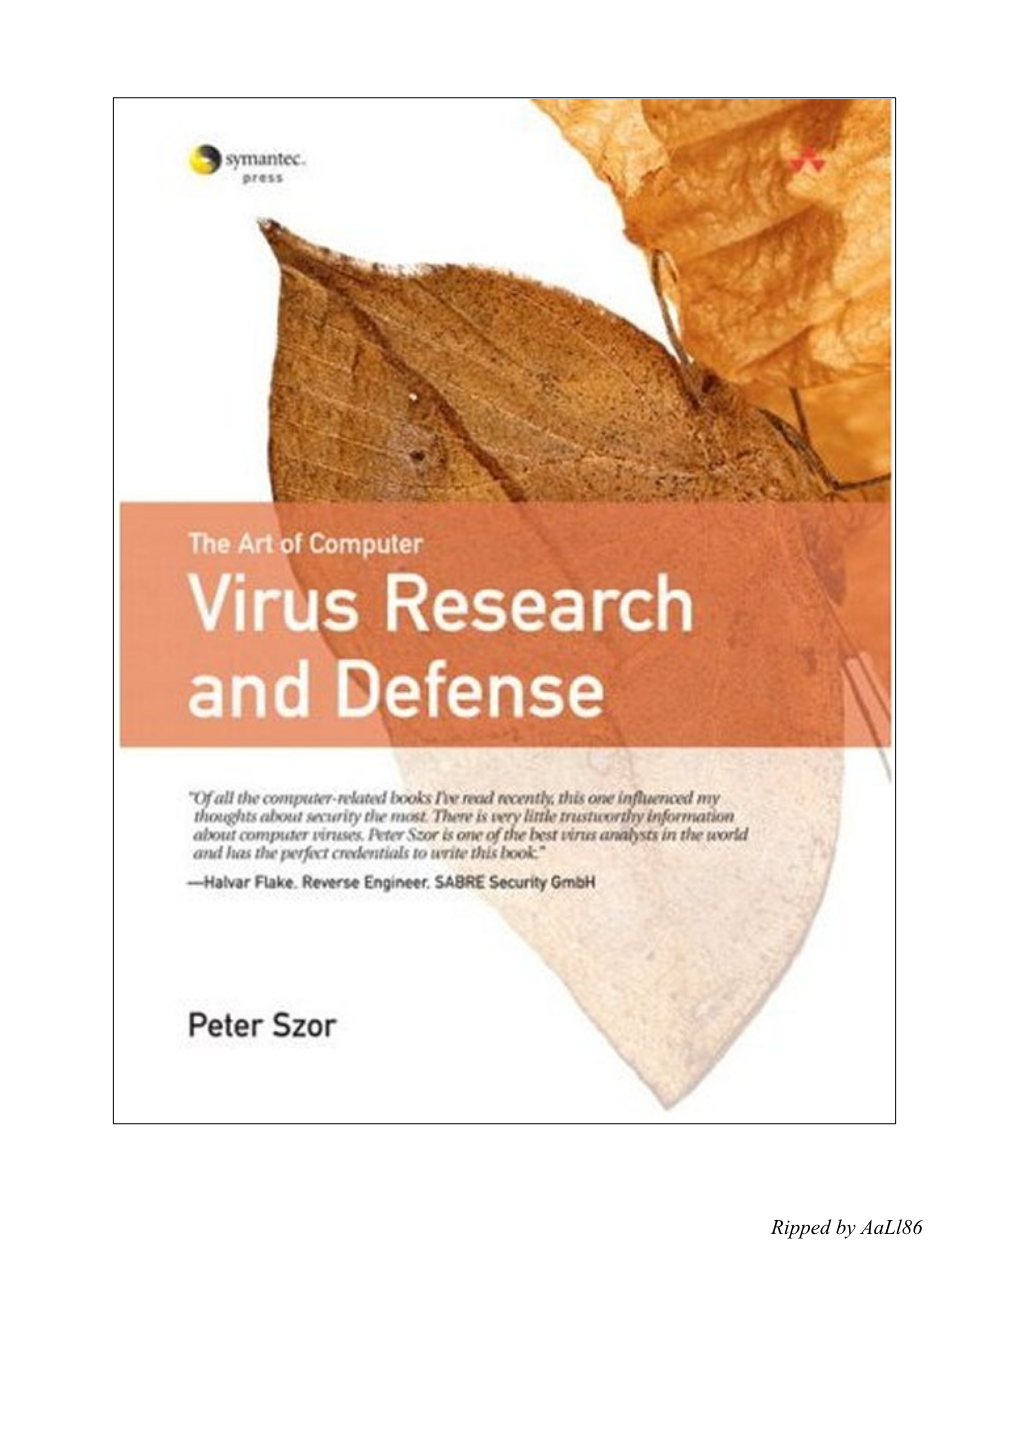 The Art of Computer Virus Research and Defense.Pdf